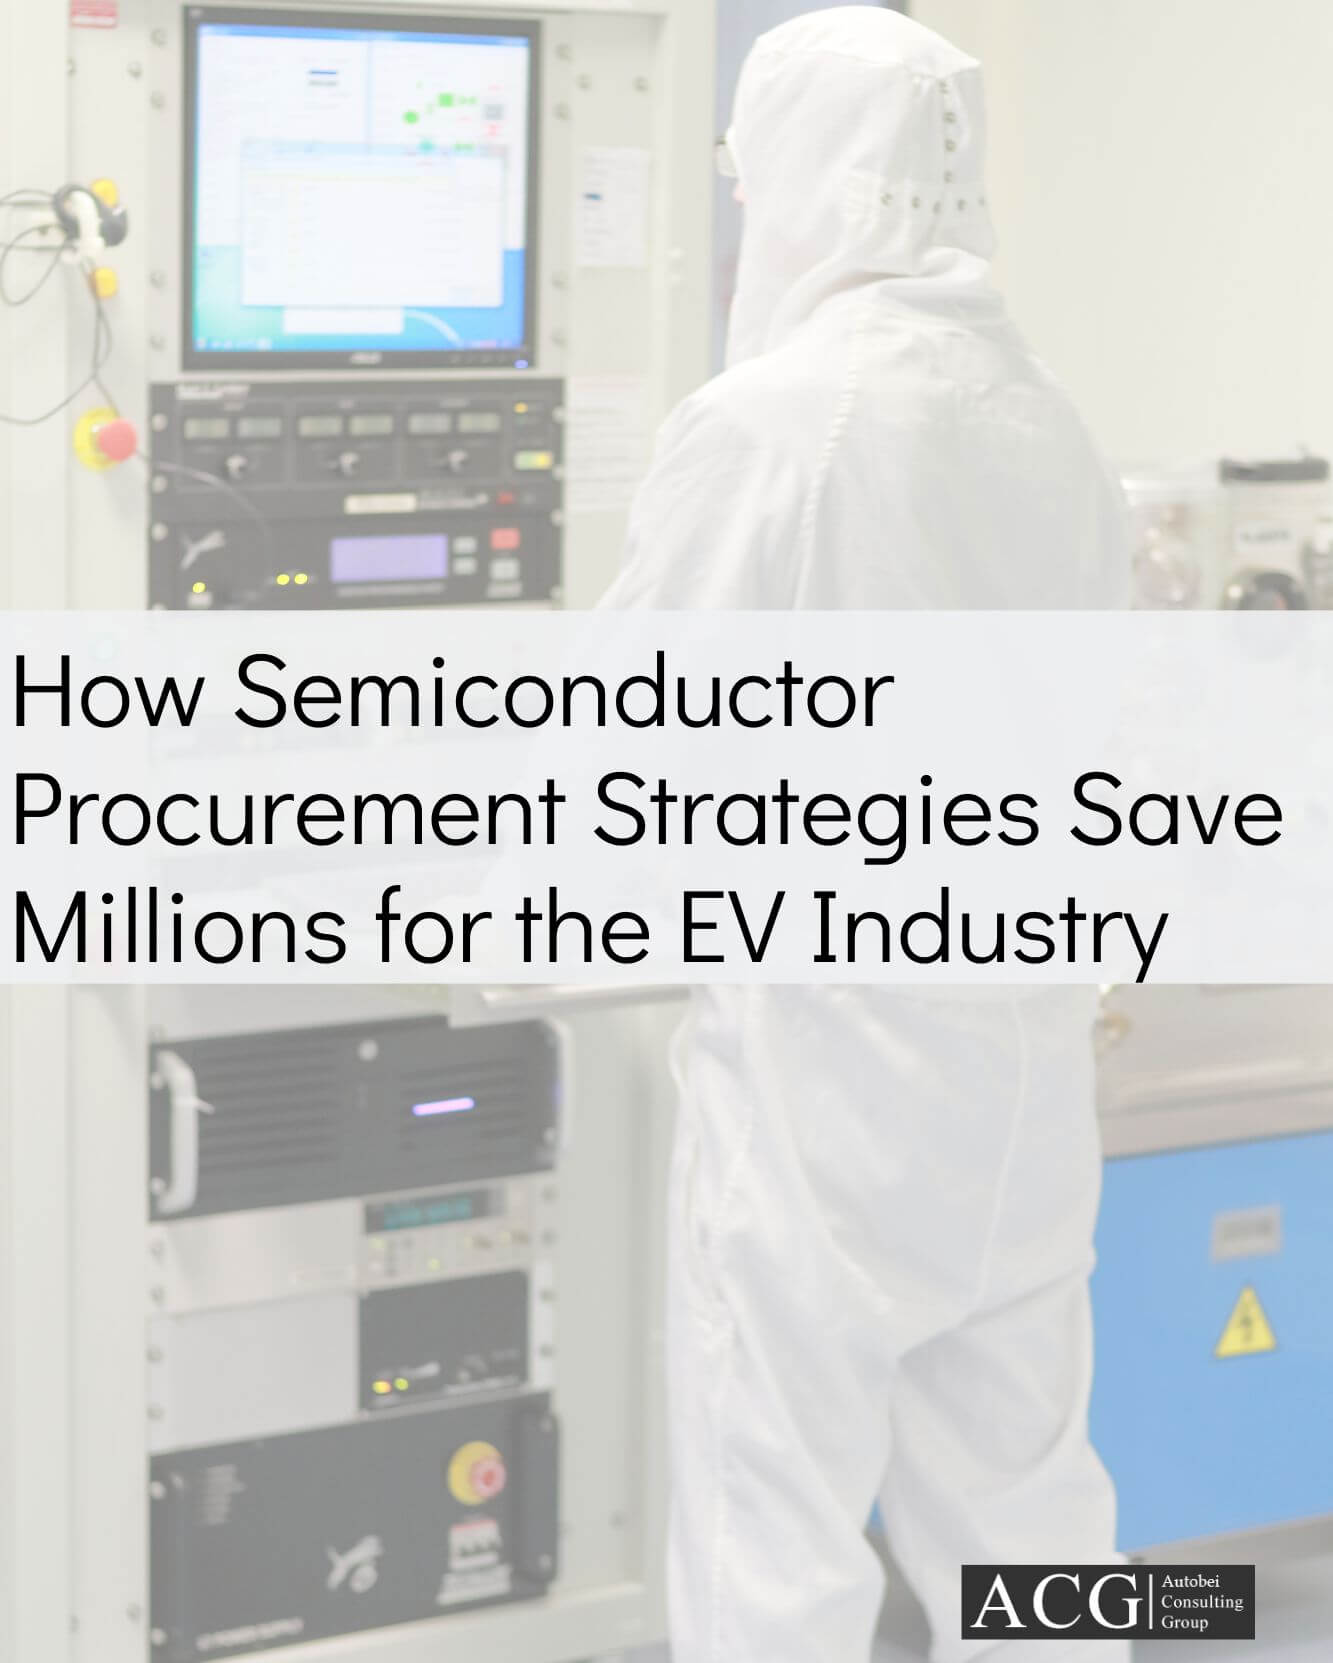 How Semiconductor Procurement Strategies Save Millions for the EV Industry